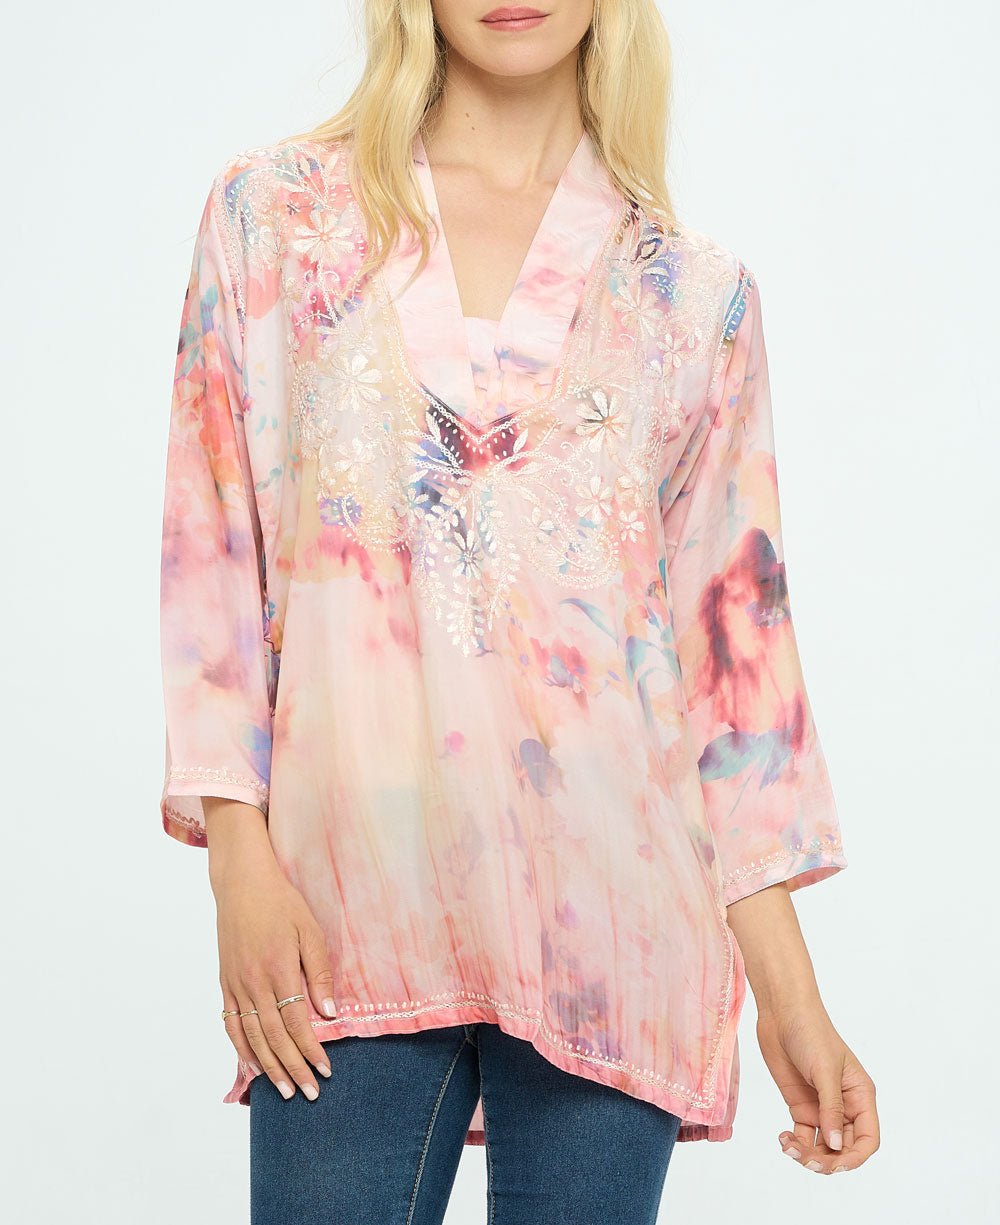 Embroidered Peach Tones V Neck Tunic Top - Shirts & Tops S